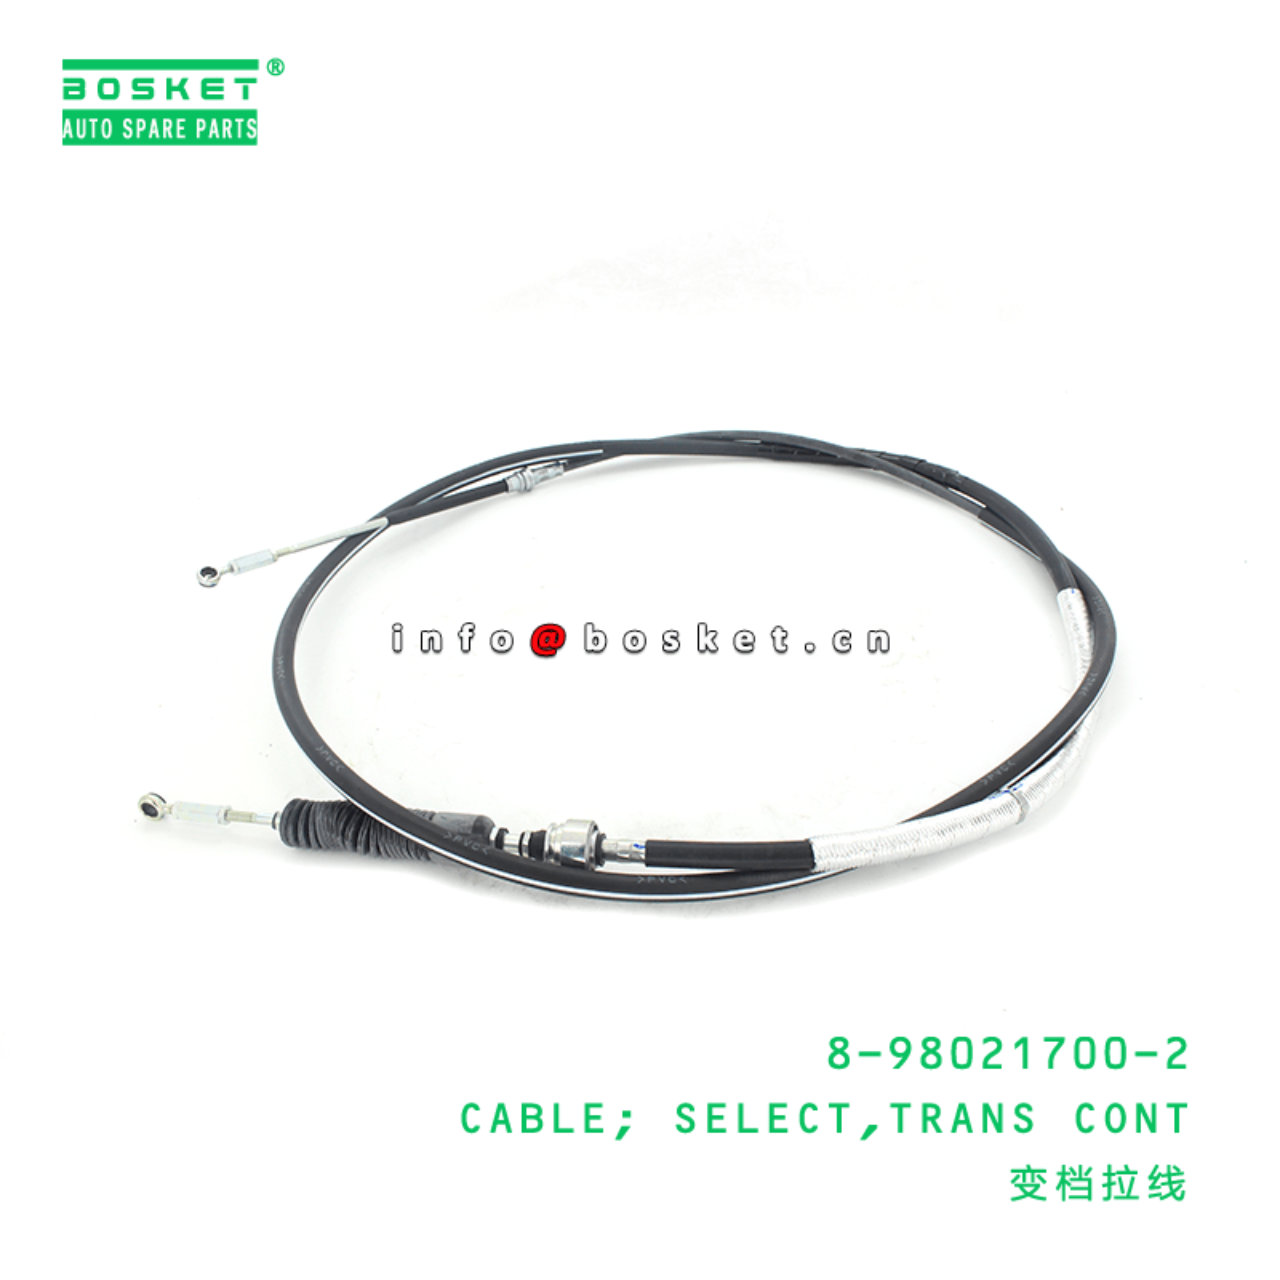 8-98021700-2 Transmission Control Select Cable 8980217002 Suitable for ISUZU NLR85 MYY5T 4JJ1T